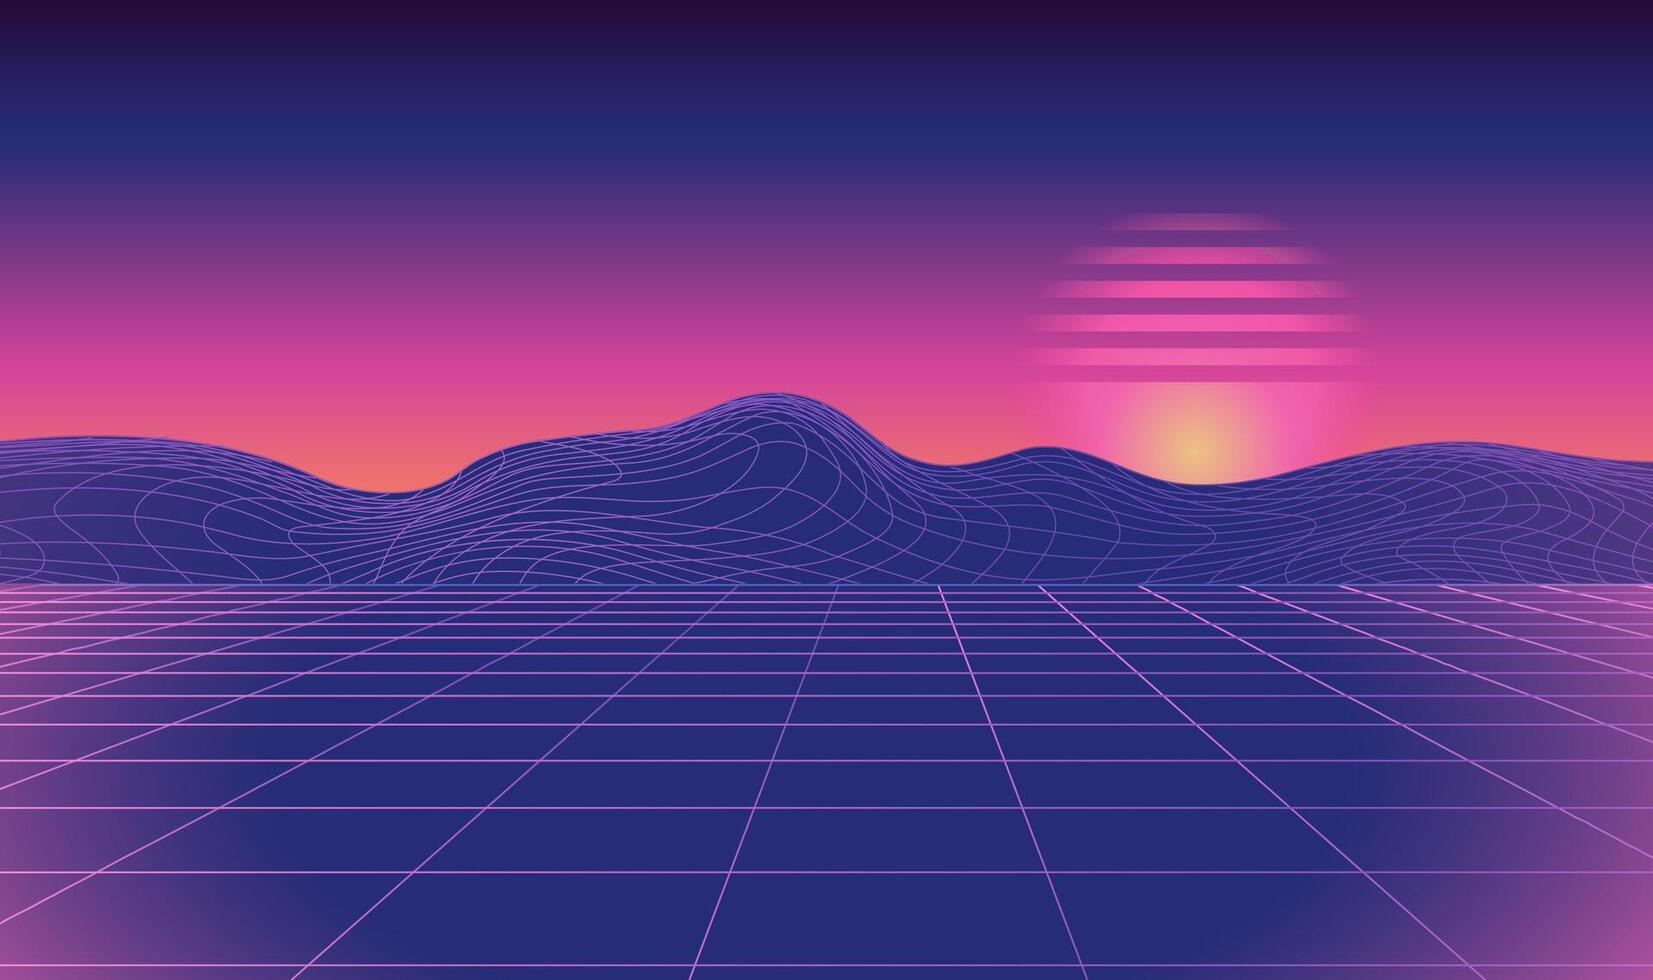 Futuristic retro landscape with flat grid and mountains. Vector futuristic illustration in retro 80s style. Digital Retro Cyber Surface. Suitable for design in the style of the 1980s.